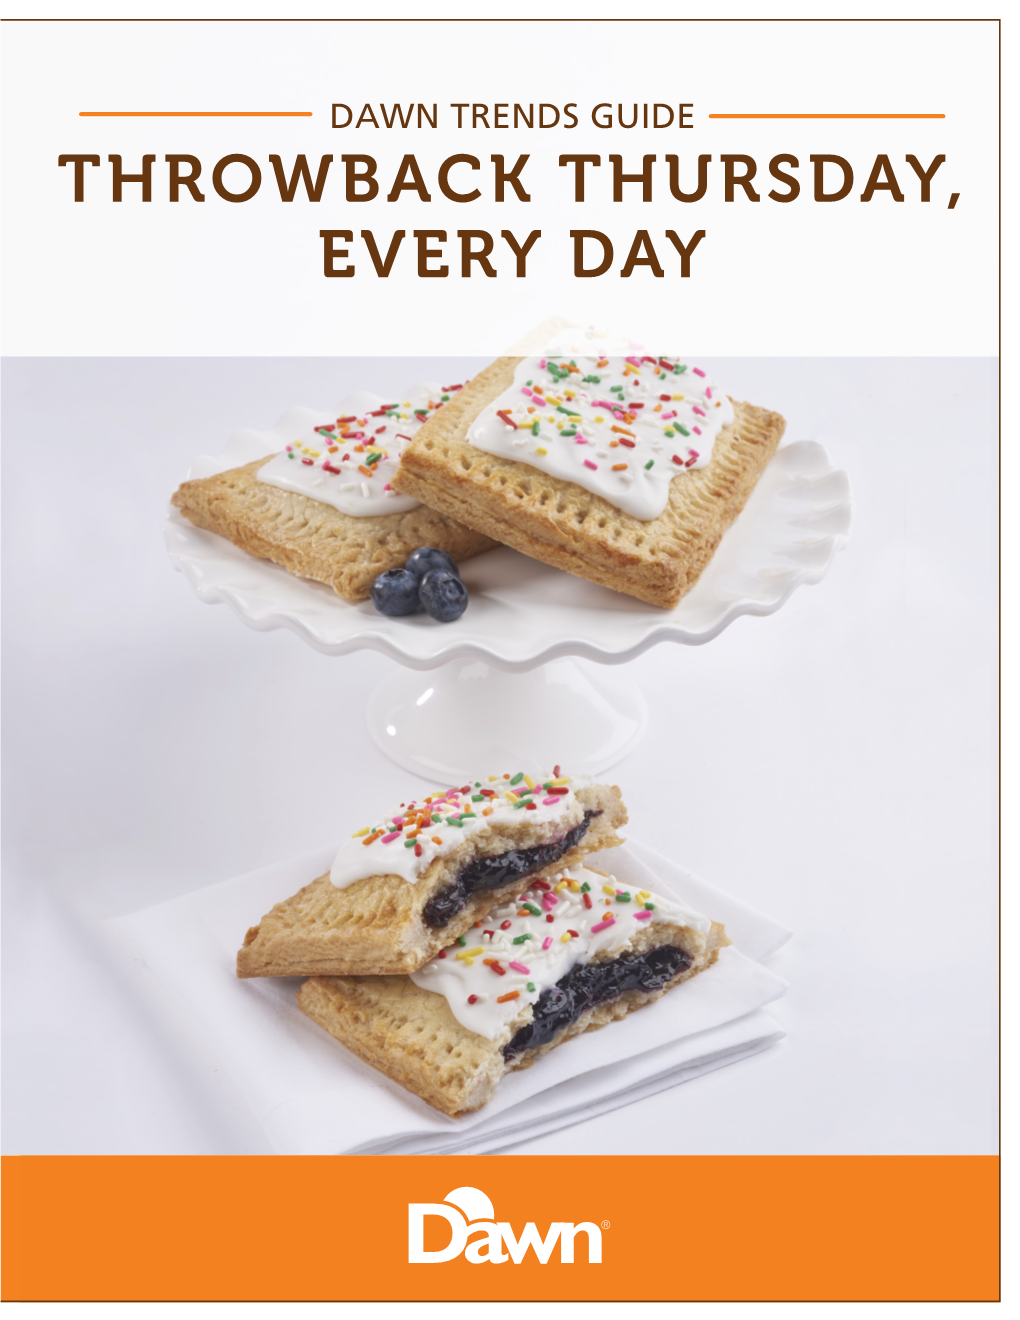 Throwback Thursday, Every Day Consumer Trends – Bring Them to Life in Your Bakery!